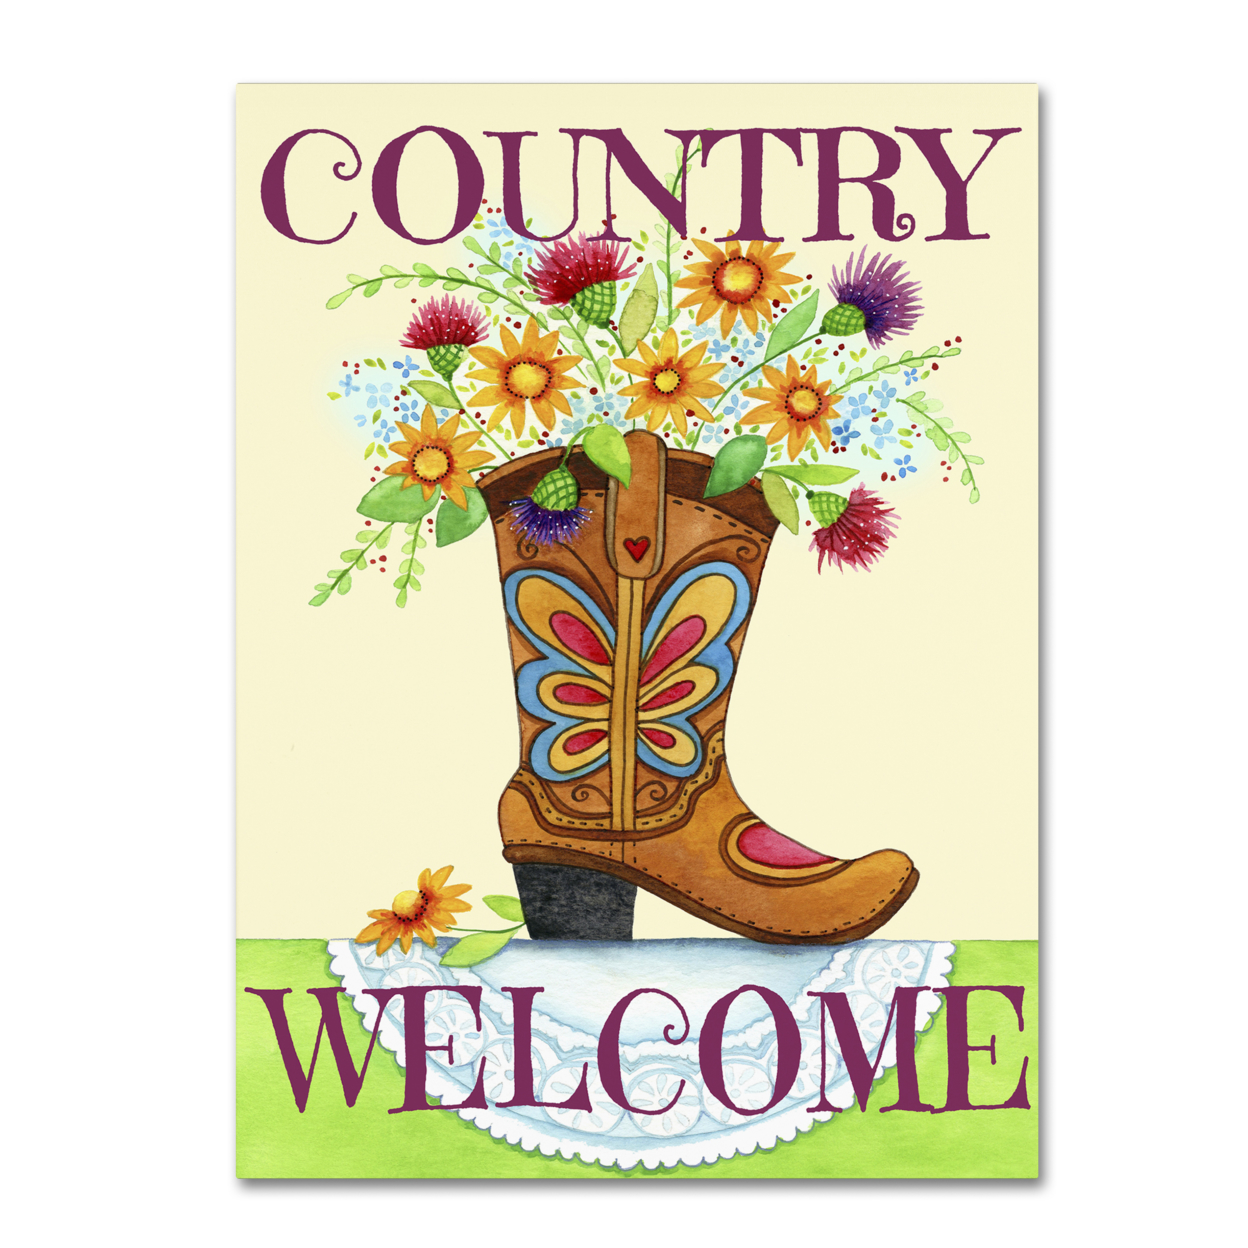 Jennifer Nilsson 'Country Welcome' Canvas Wall Art 35 X 47 Inches